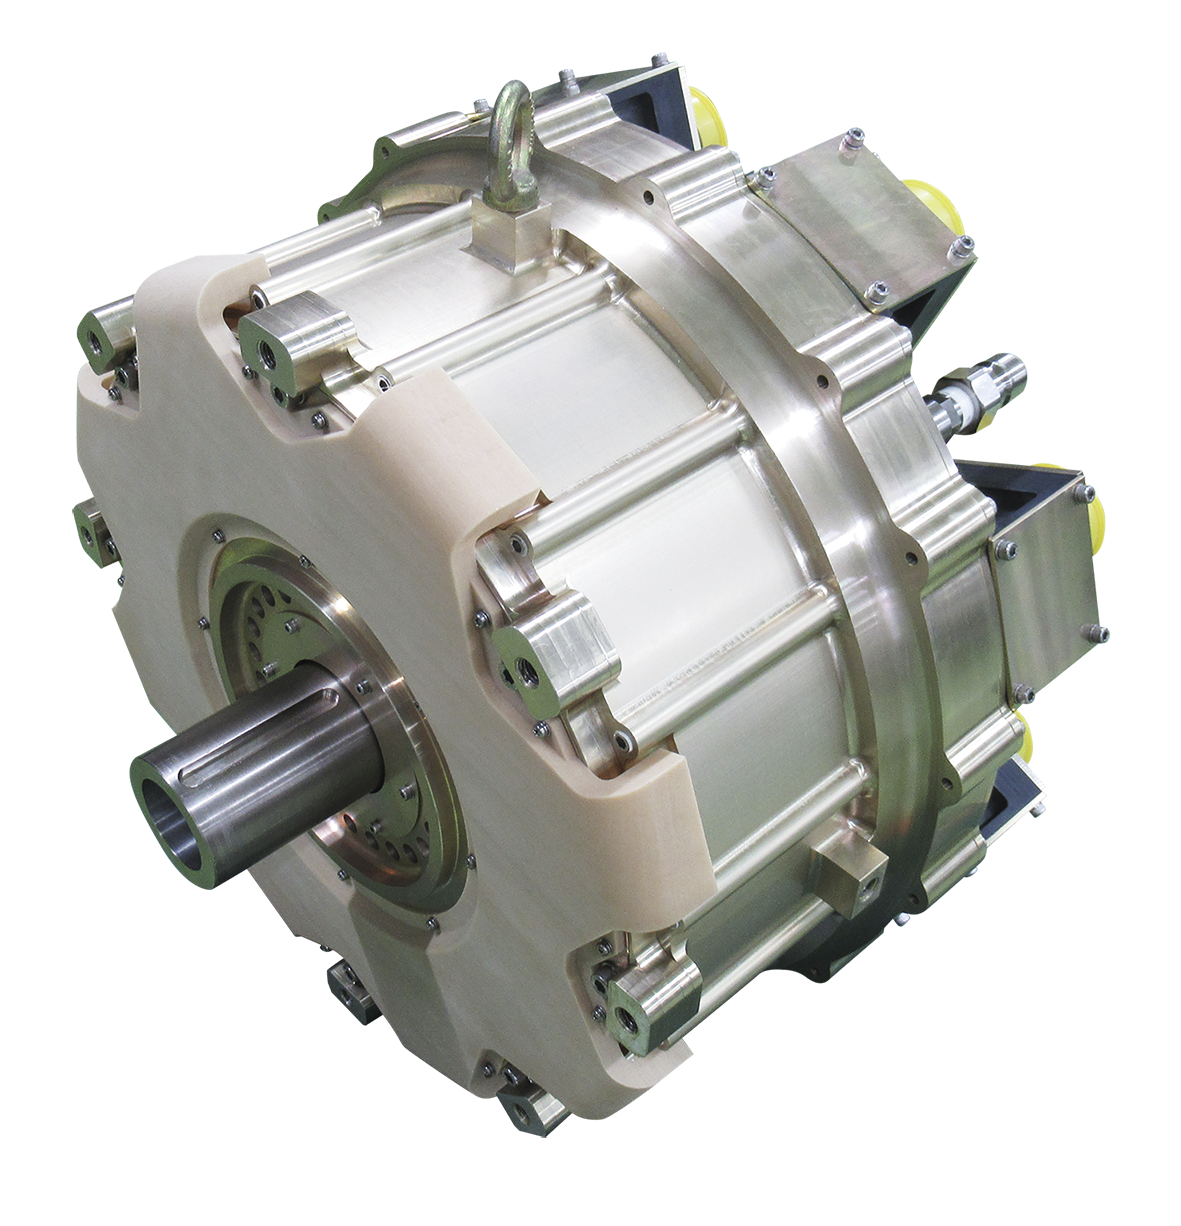 Exterior View of the High-Output Density Aircraft Motor